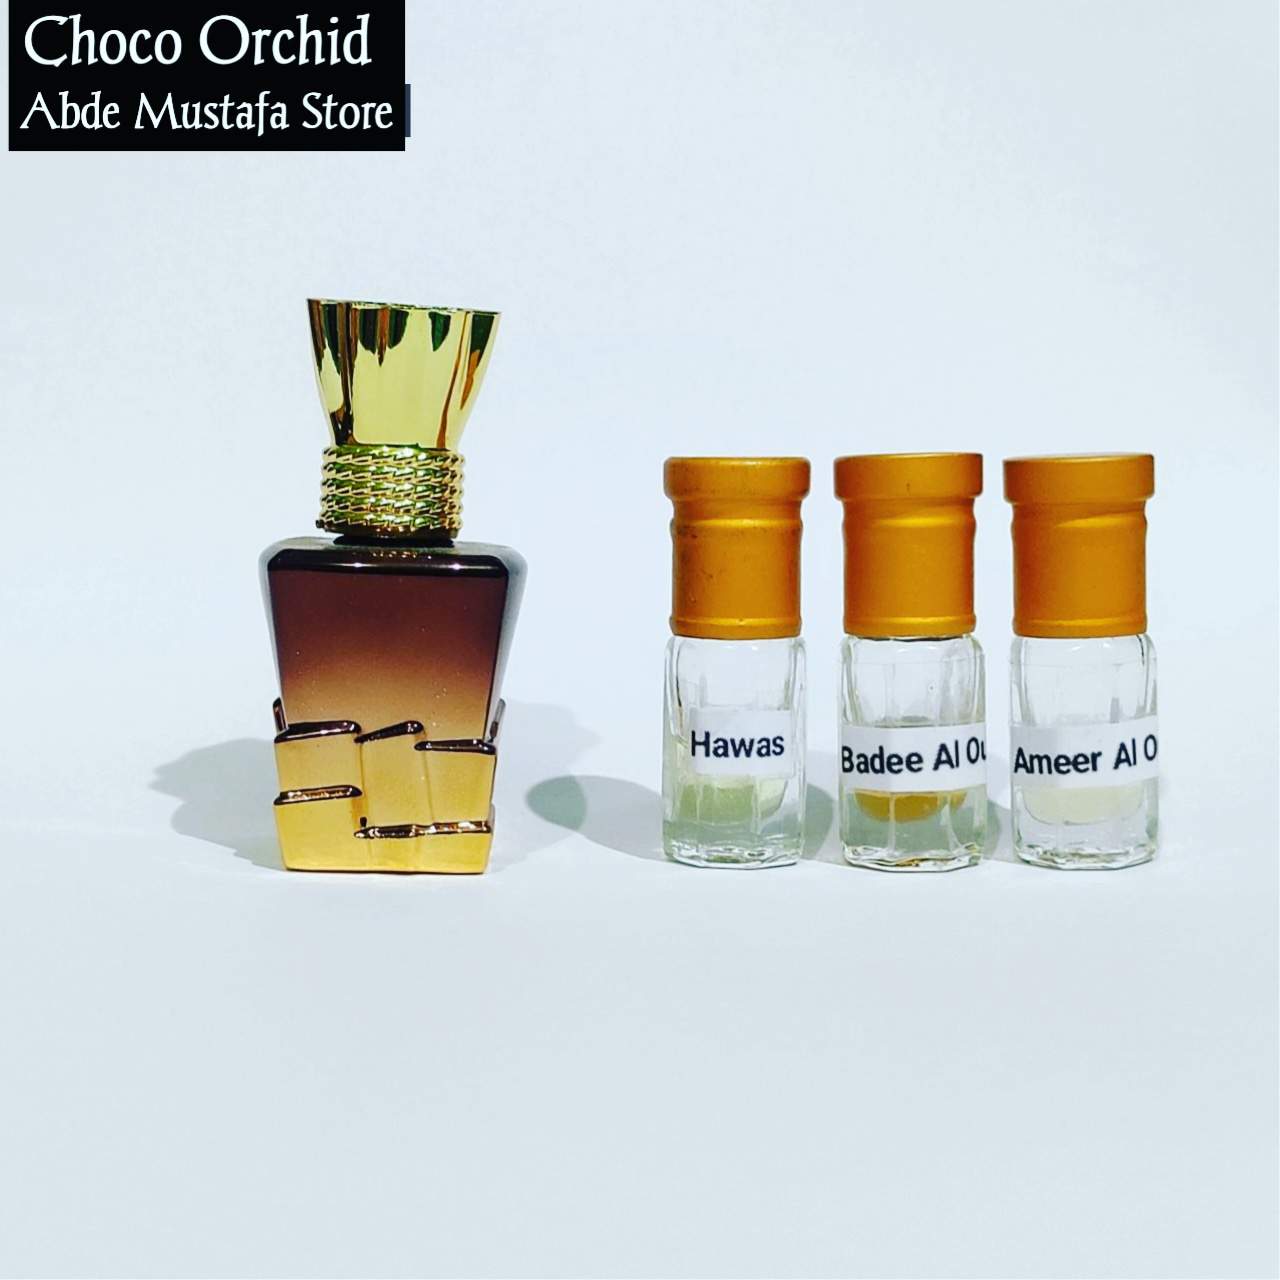 Choco Orchid Premium And Best Quality Attar By Abde Mustafa Store